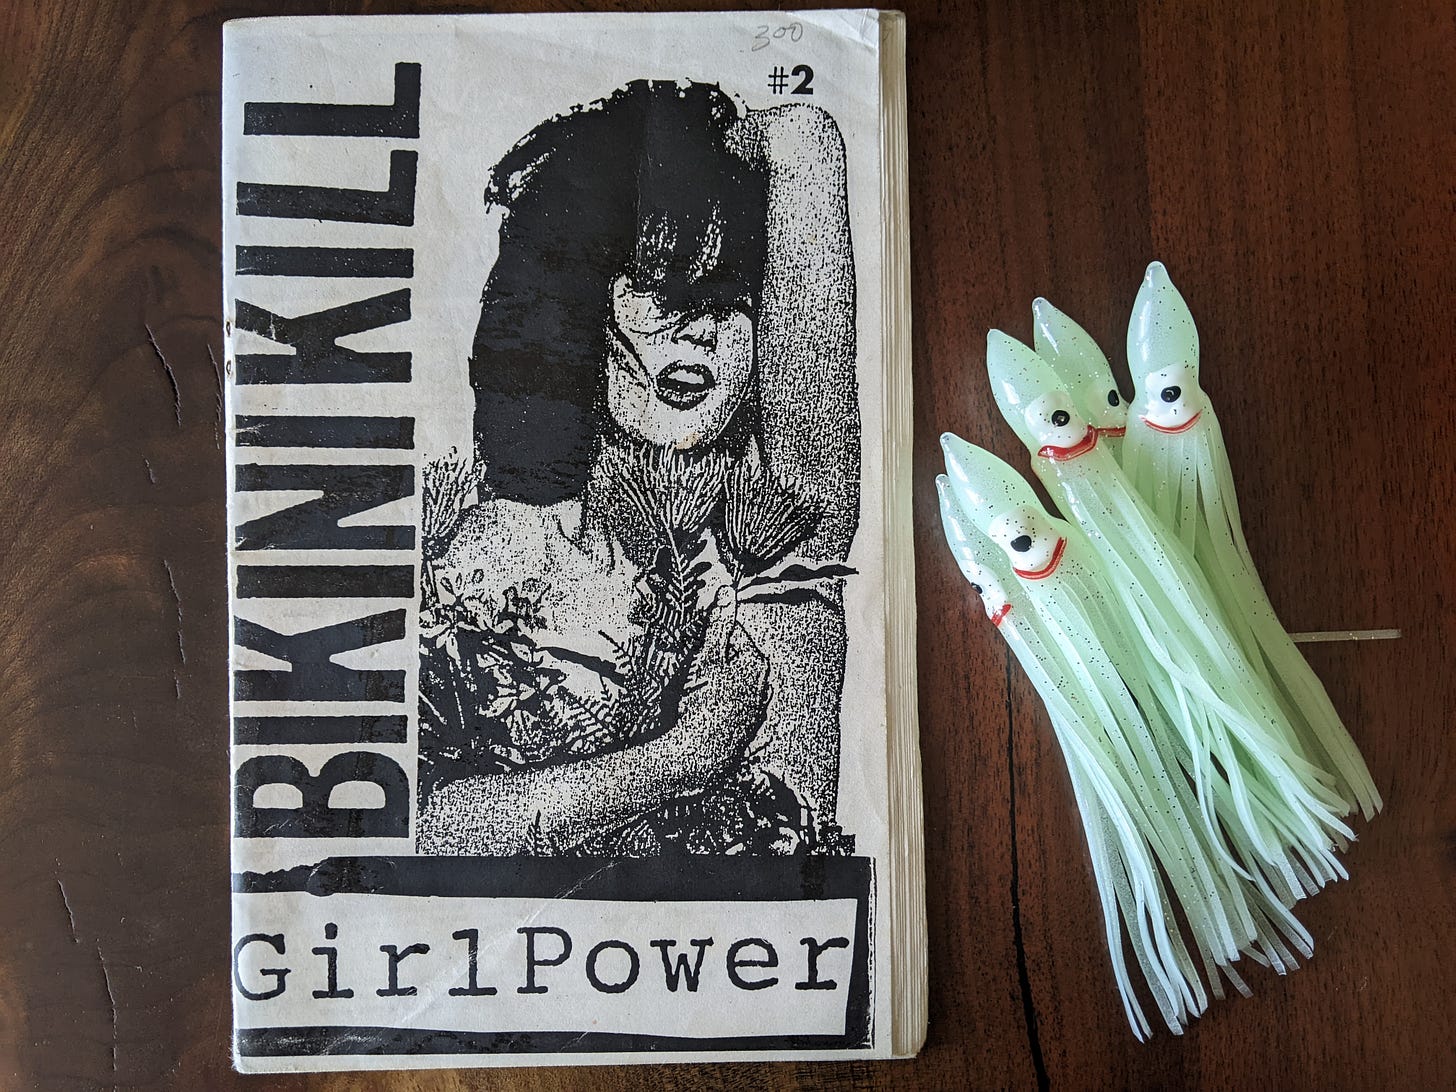 On a walnut wood table is an old zine with the words 'BIKINI KILL GirlPower' #2 next to a grainy photo of a woman on the cover. Next to the zine on the table are 5 glow-in-the-dark fishing lure squid because why not.